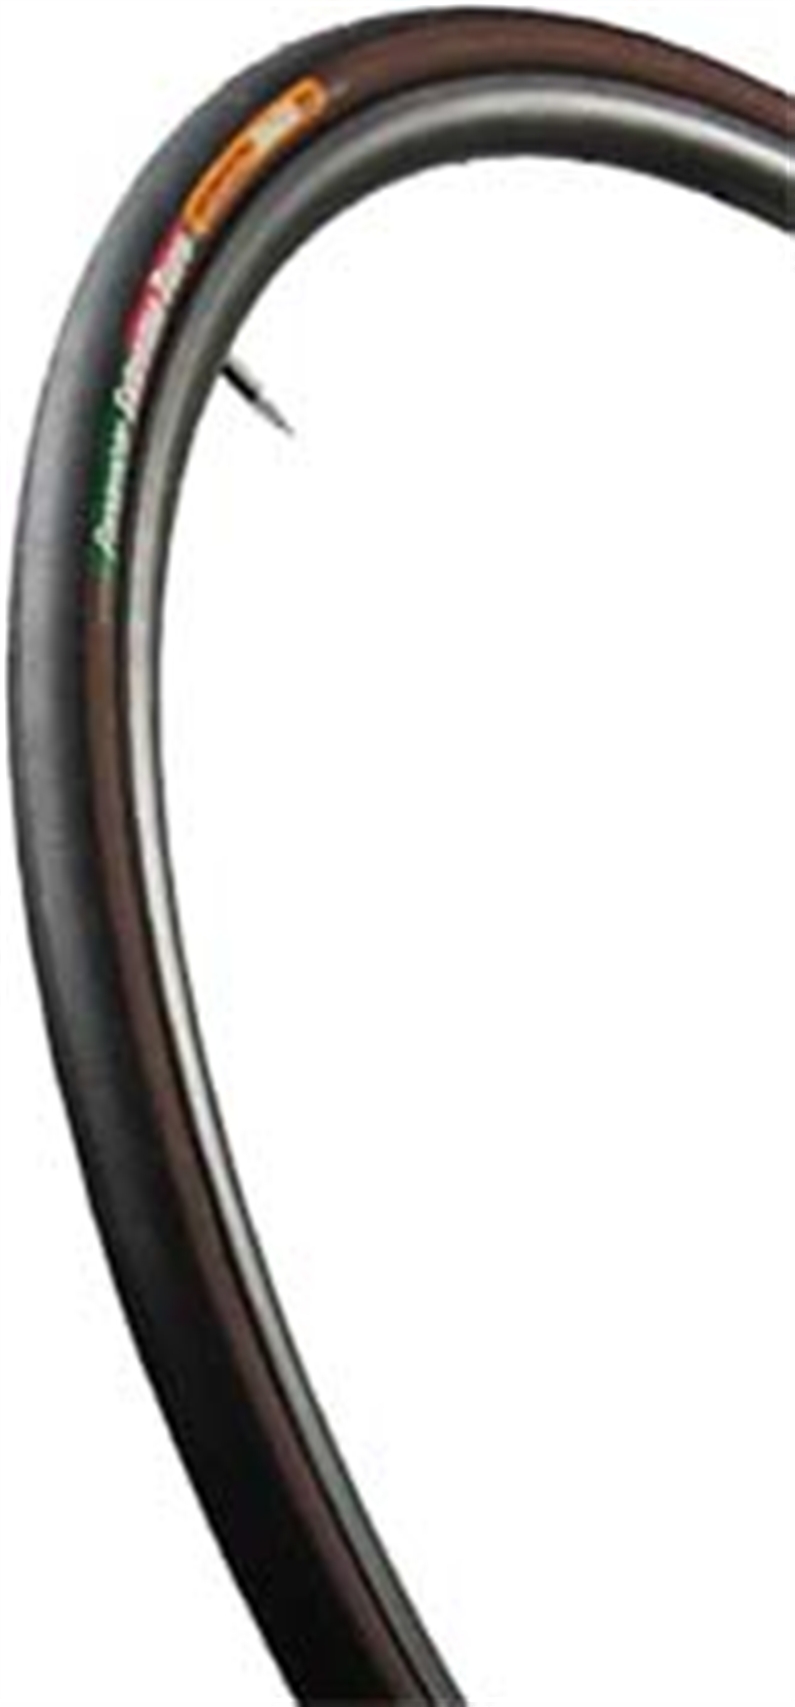 THE EXTREME DURO IS THE BEEFED UP, EXTREMELY DURABLE, HIGH PERFORMANCE ROAD TYRE THAT UK RIDERS